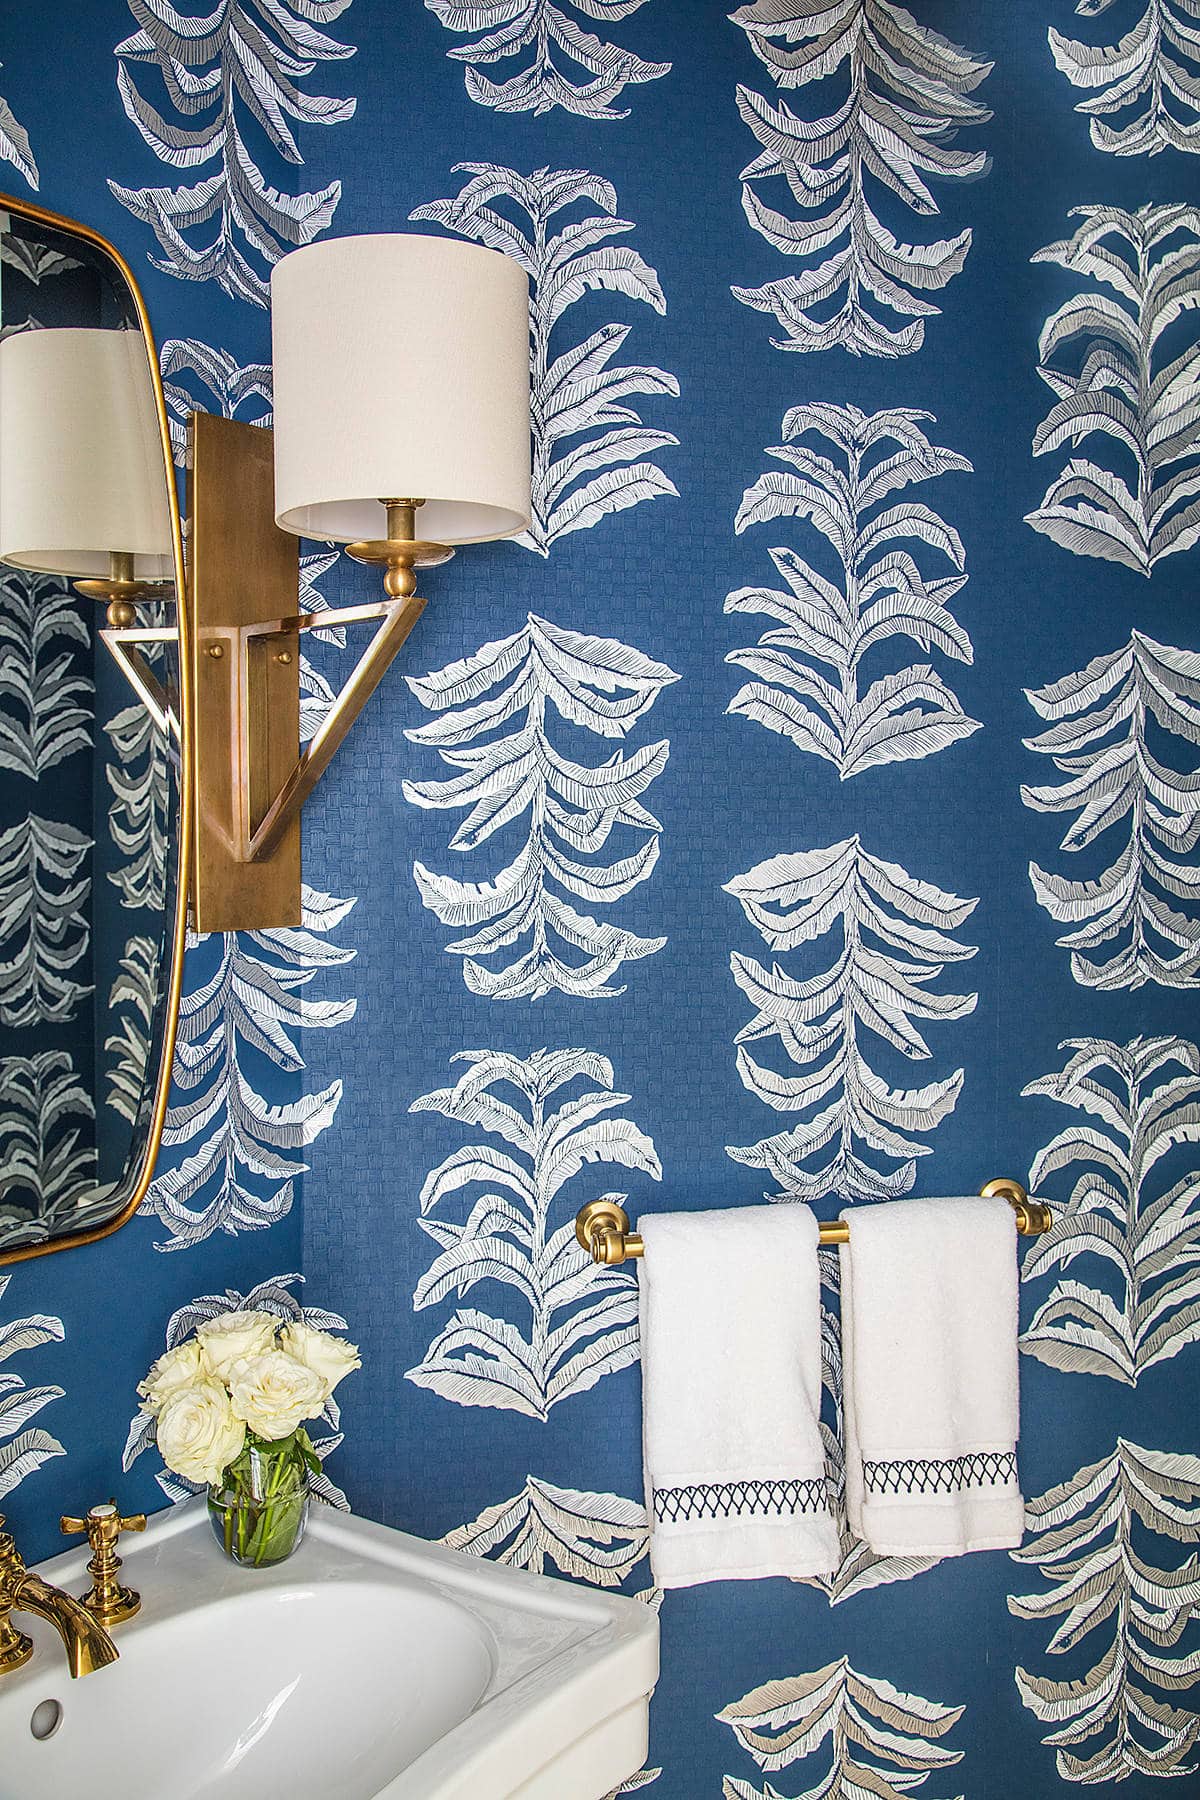 Home Tour: Blue and white wallpaper in powder room